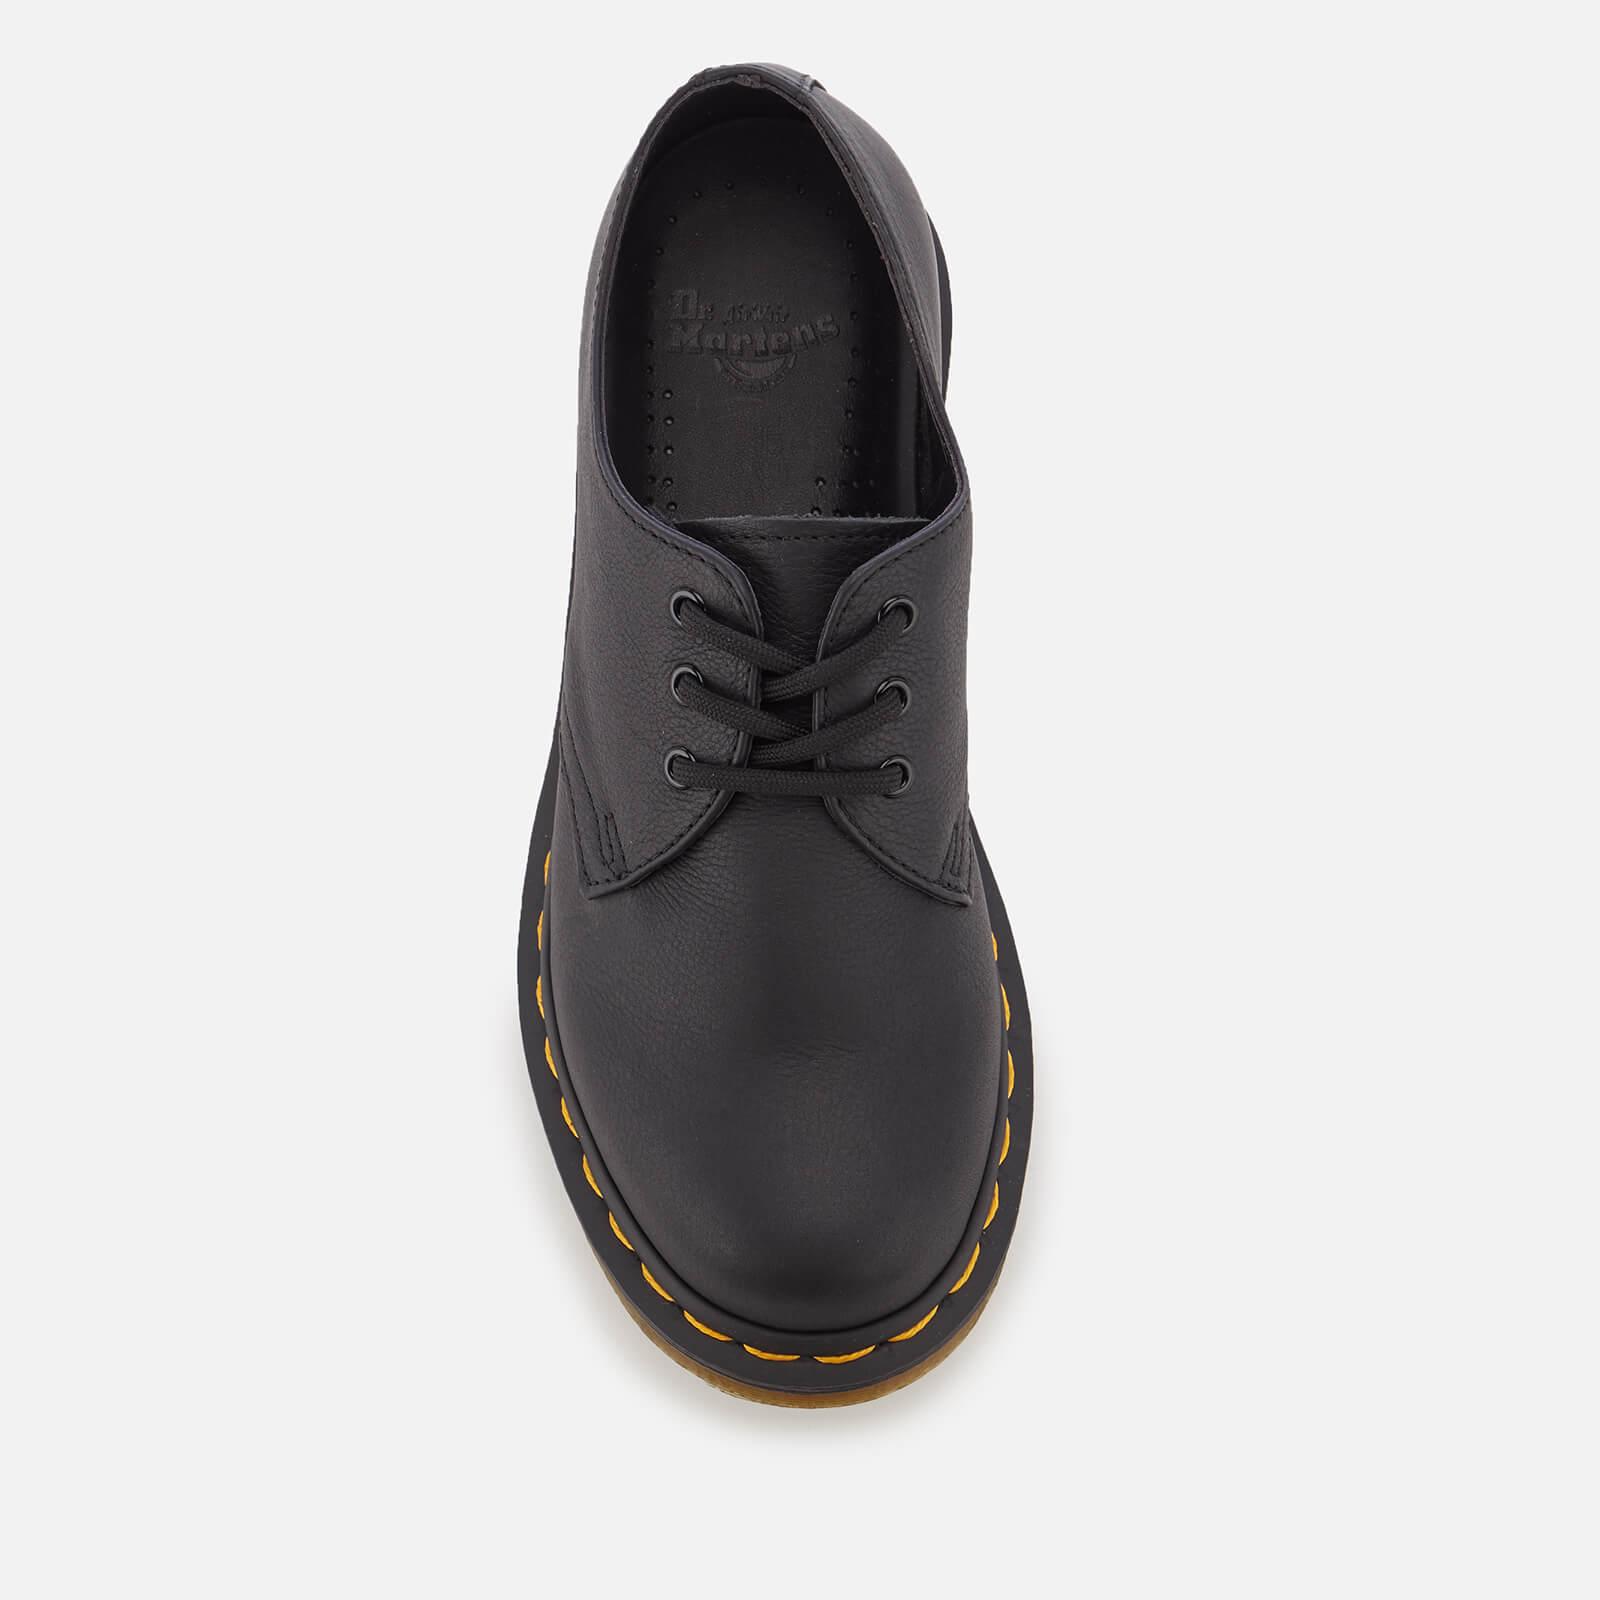 Dr. Martens 1461 W Virginia Leather 3-eye Shoes in Black | Lyst